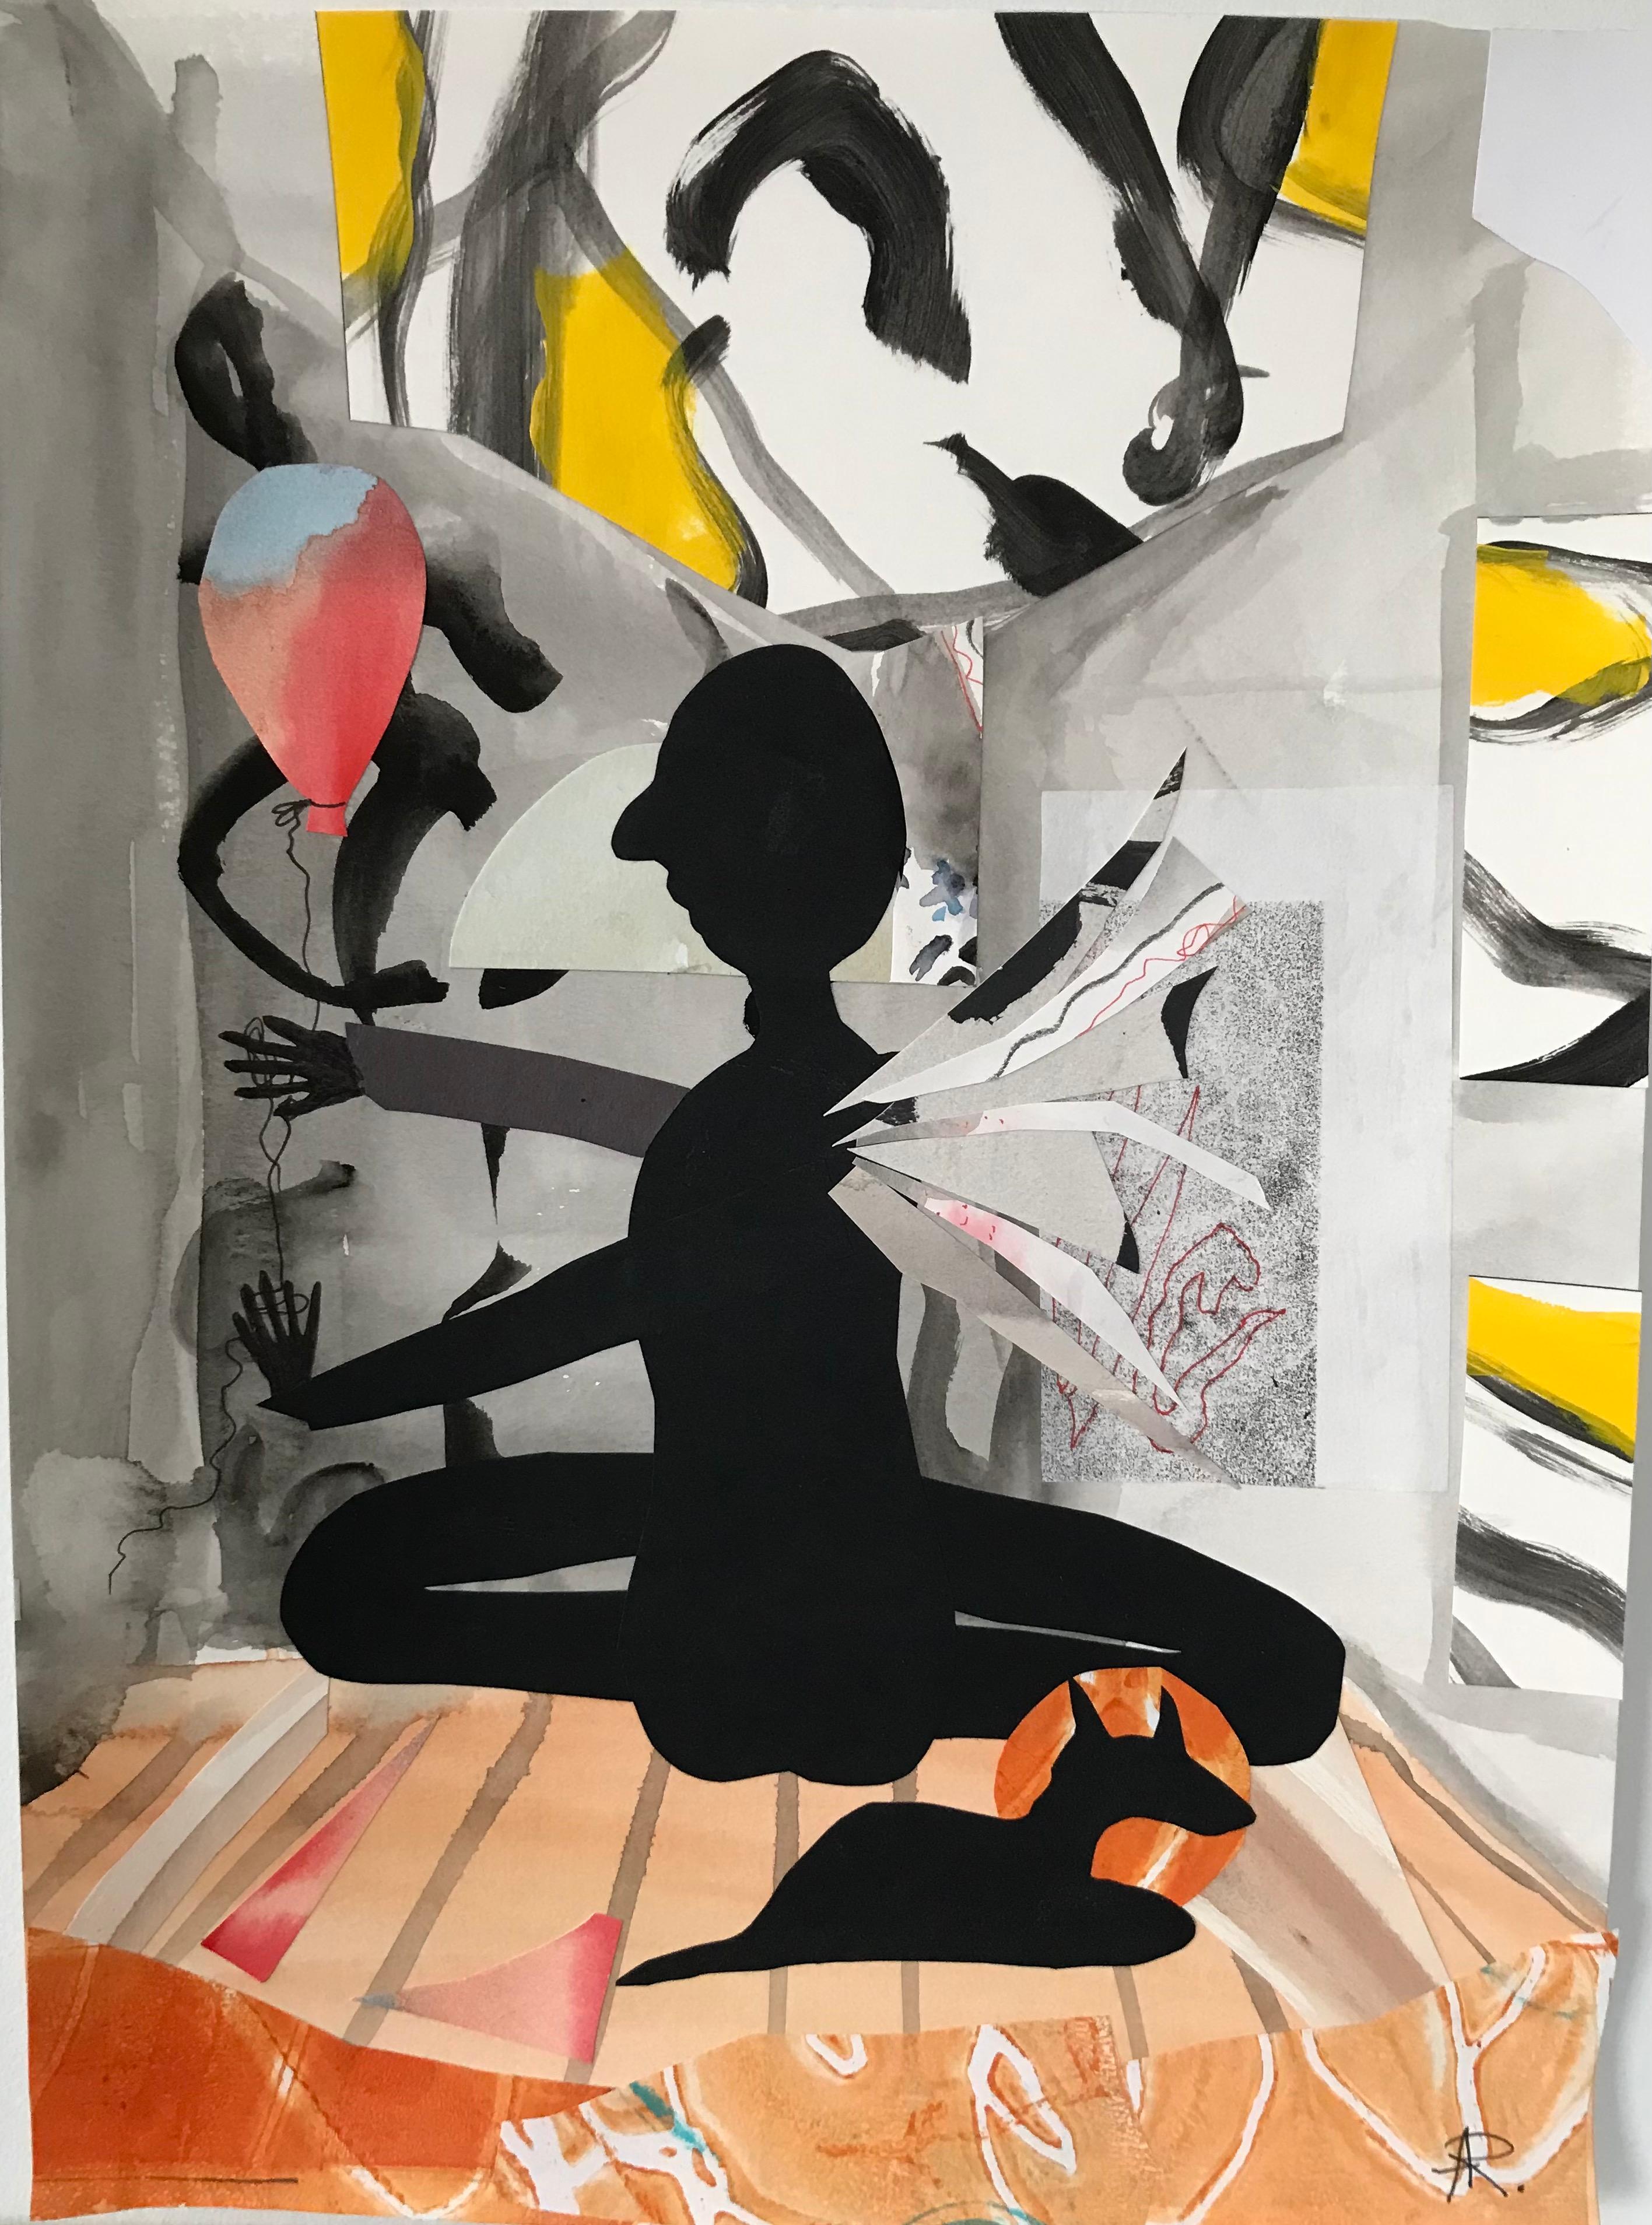 Alexandra Rozenman Interior Painting - "Magic Balloon", watercolor, collage, black cut-out, mixed media, orange, red